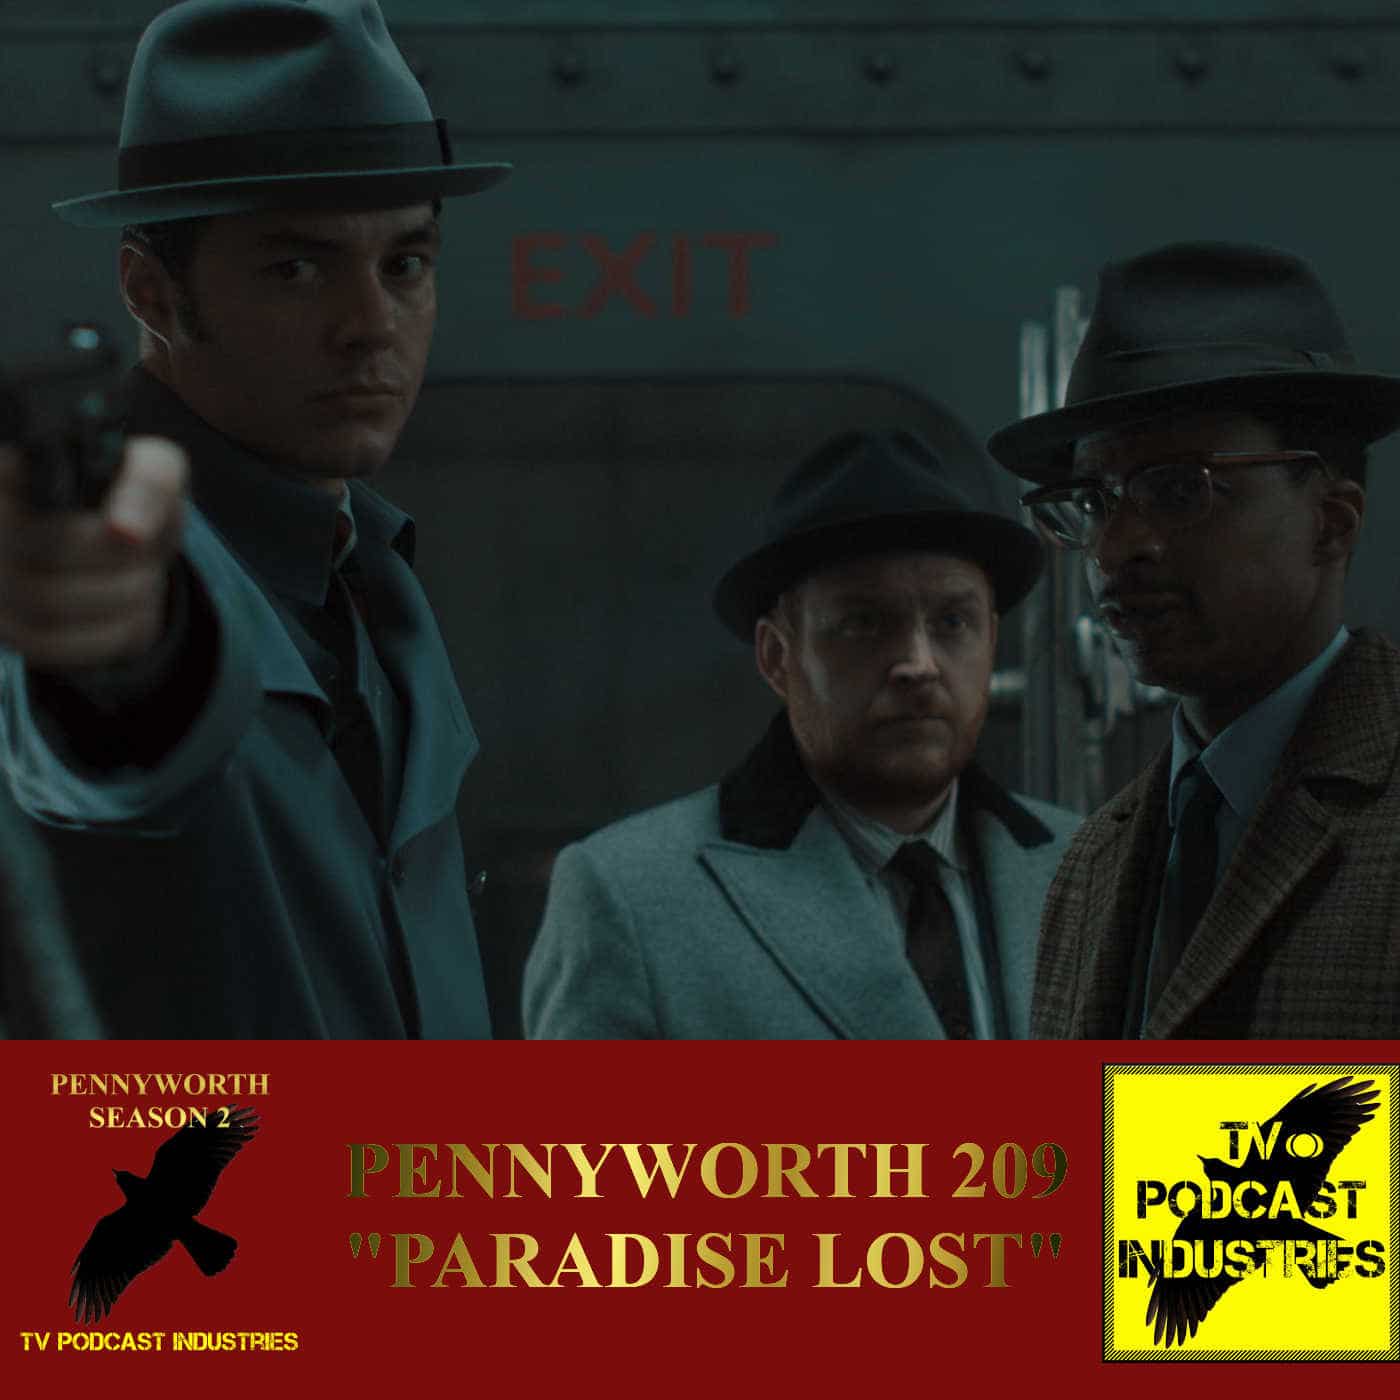 Pennyworth Season 2 Episode 9 "Paradise Lost" Podcast by TV Podcast Industries